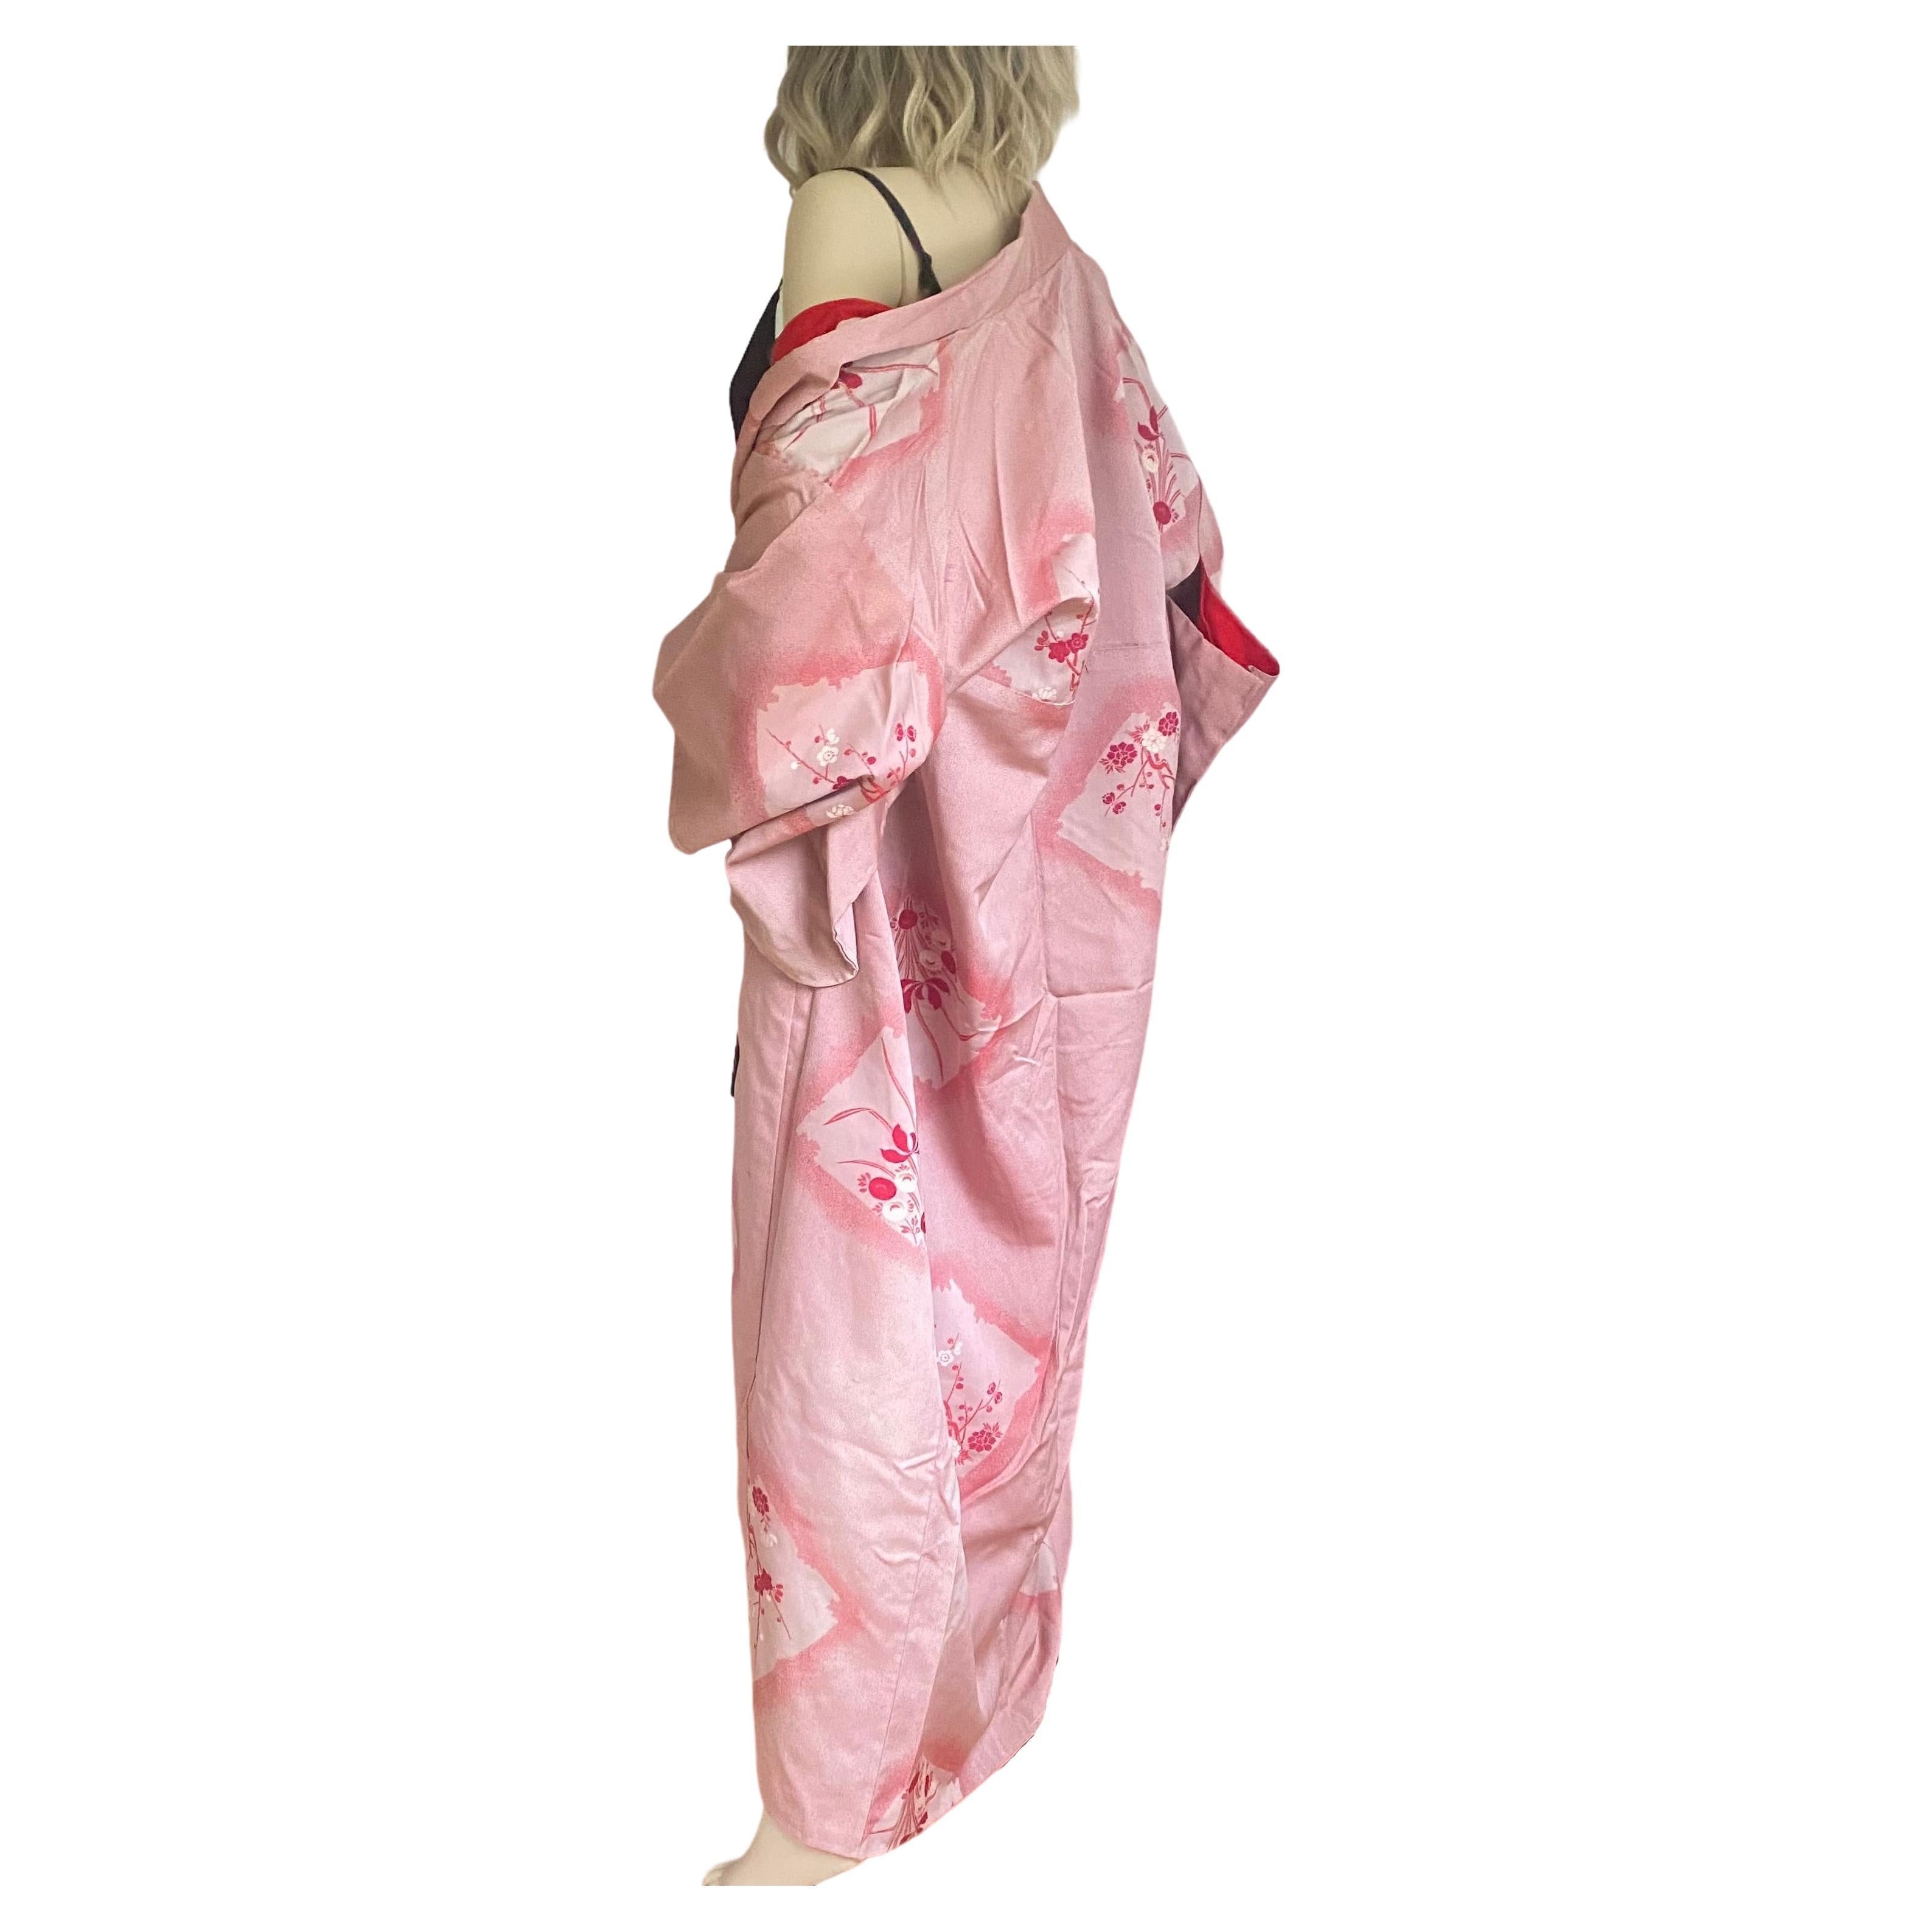 Circa: MEIJI period 1890
Place of Origin: Japan
Material: Substantial Silk brocade
Condition: excellent
Red/pink silk brocade kimono is hand-sewn and made in Japan.
Exquisite design of sakura (cherry blossom) branches  
Red silk lining.
Rare